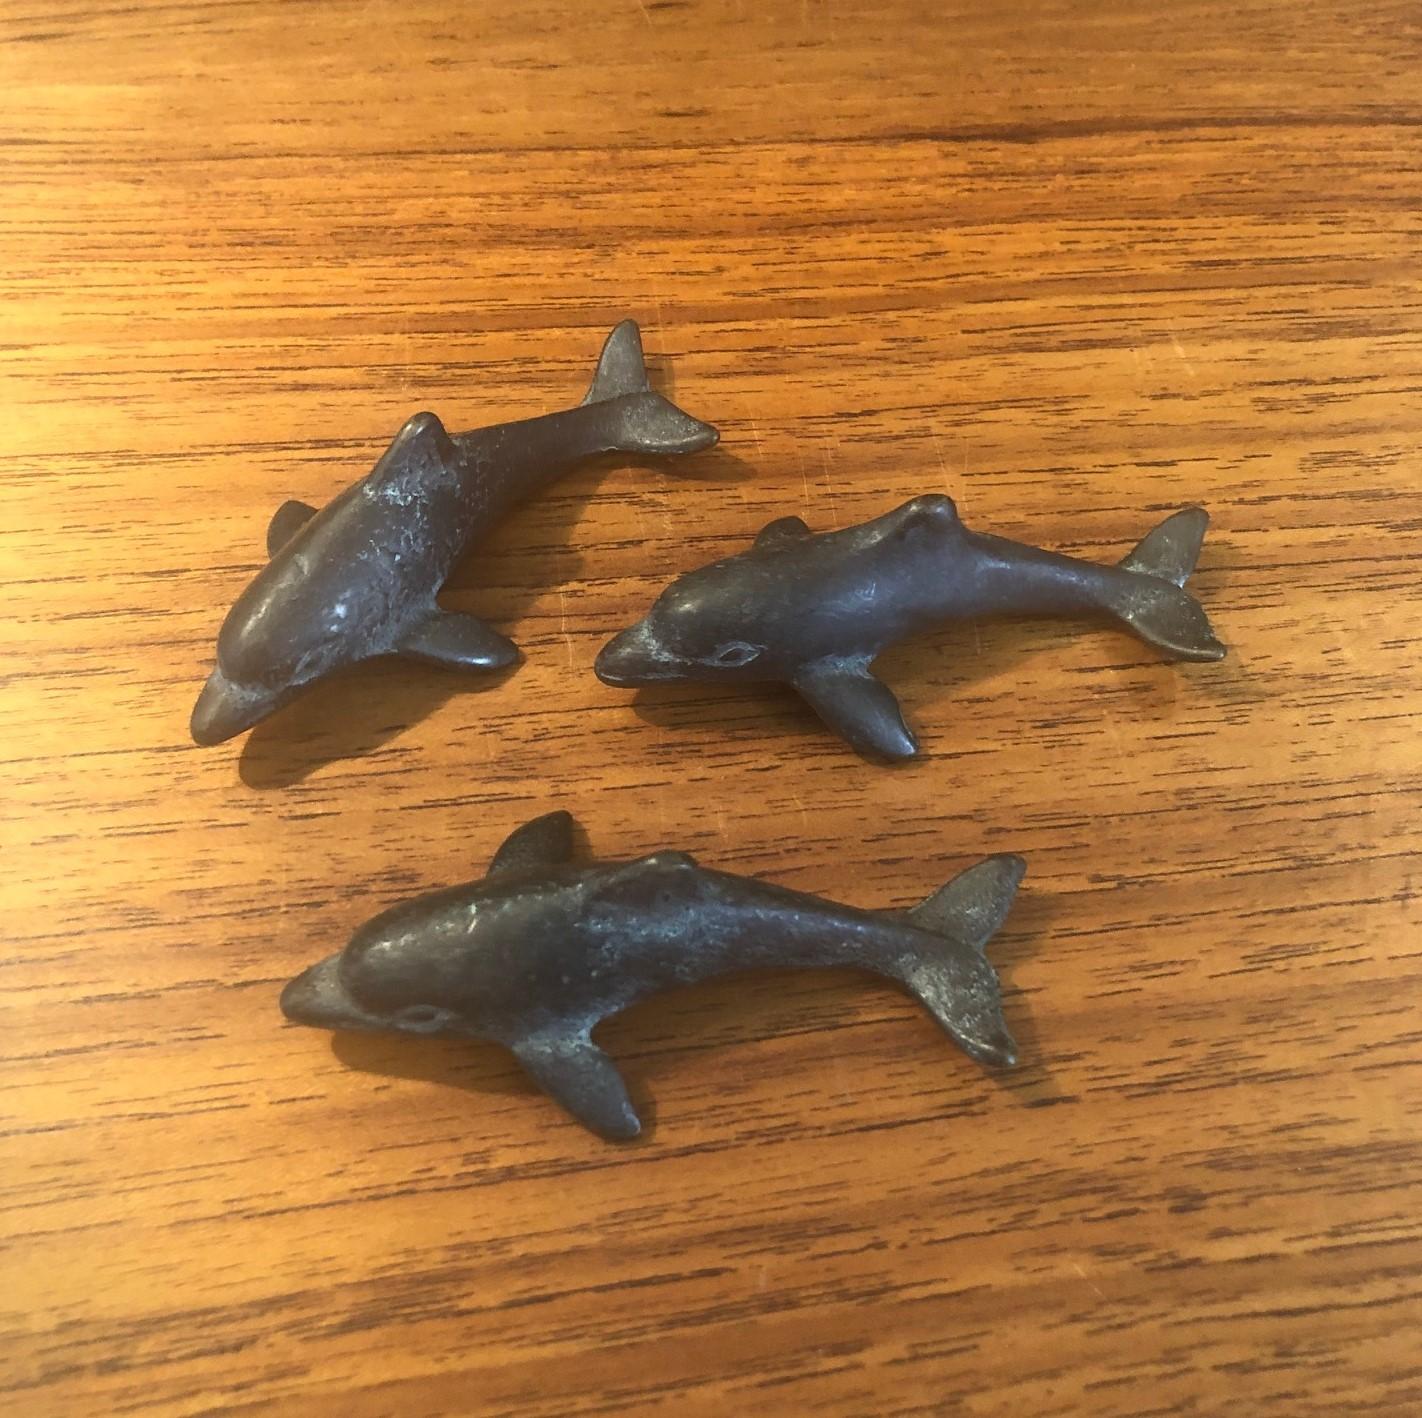 Set of three miniature bronze Japanese dolphins, circa 1970s. The dolphins are about 2.75